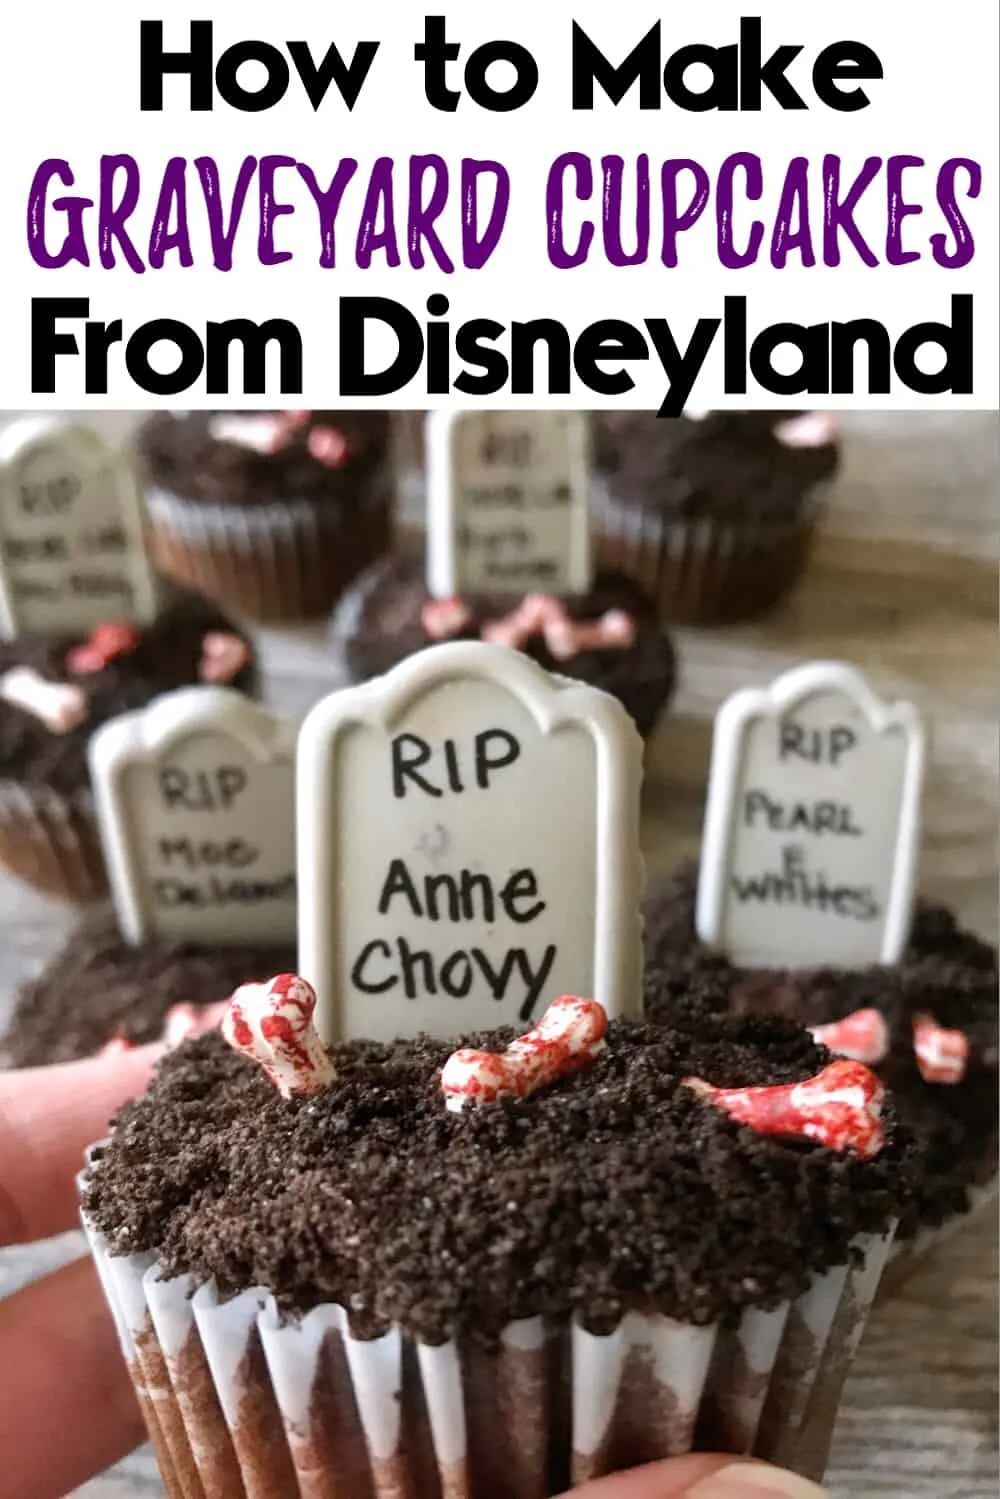 How to Make Graveyard Cupcakes from Disneyland